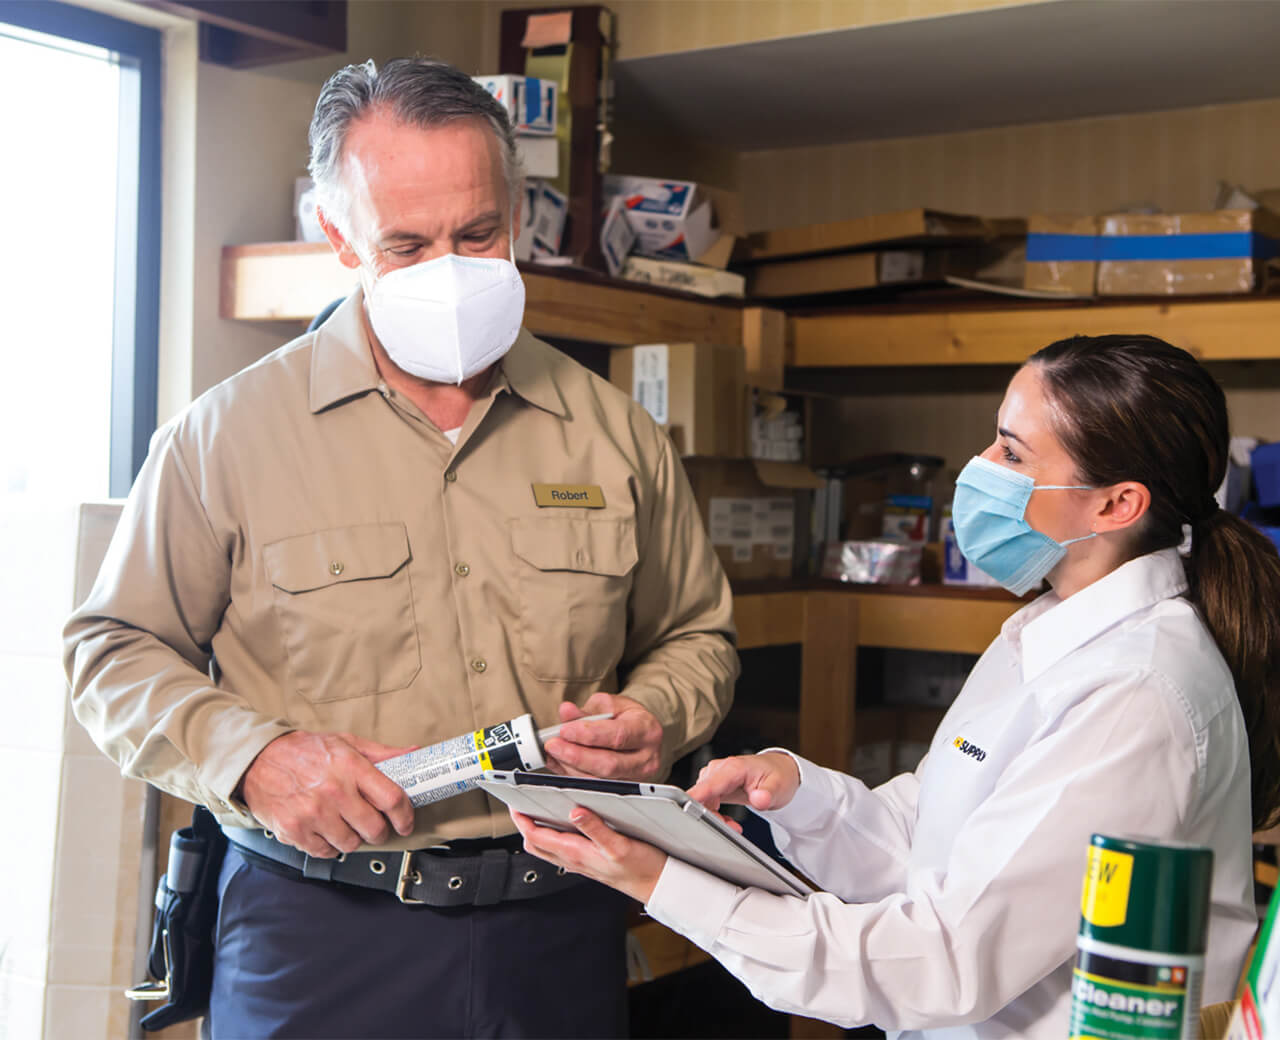 2 HD Supply personnel wearing masks and looking at a tablet in a warehouse.